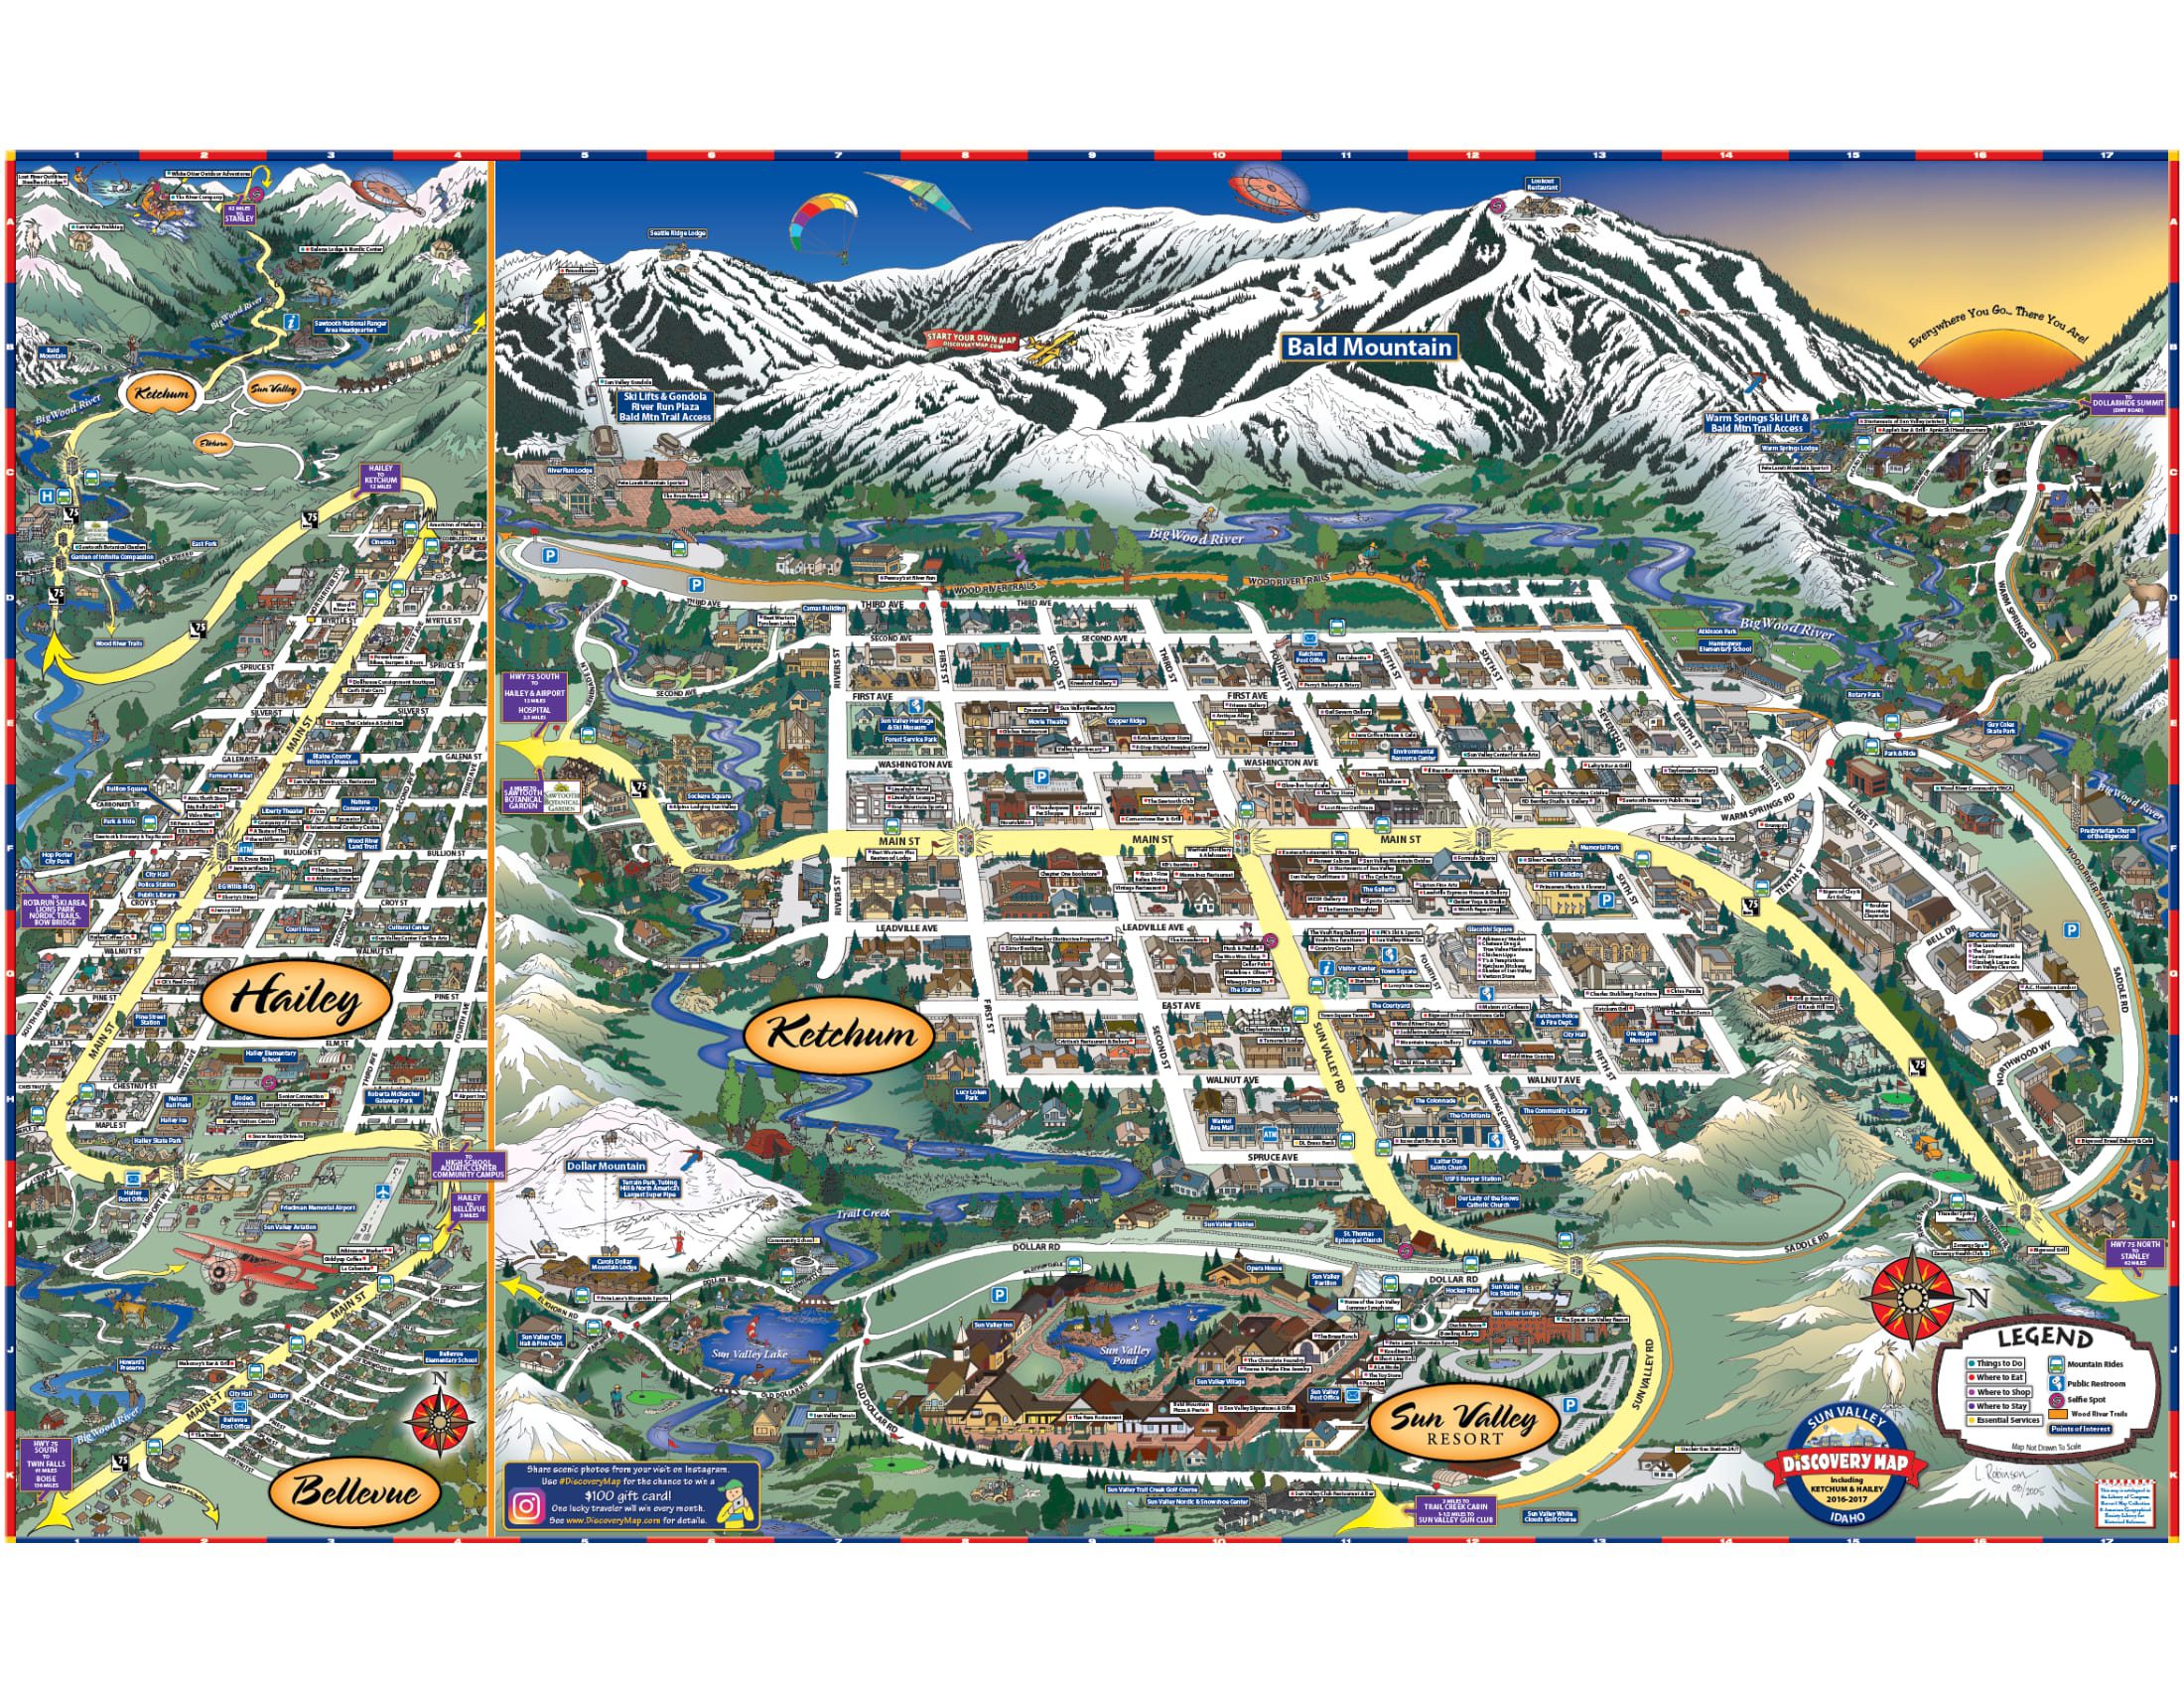 Sun Valley Discovery Map Visit Sun Valley